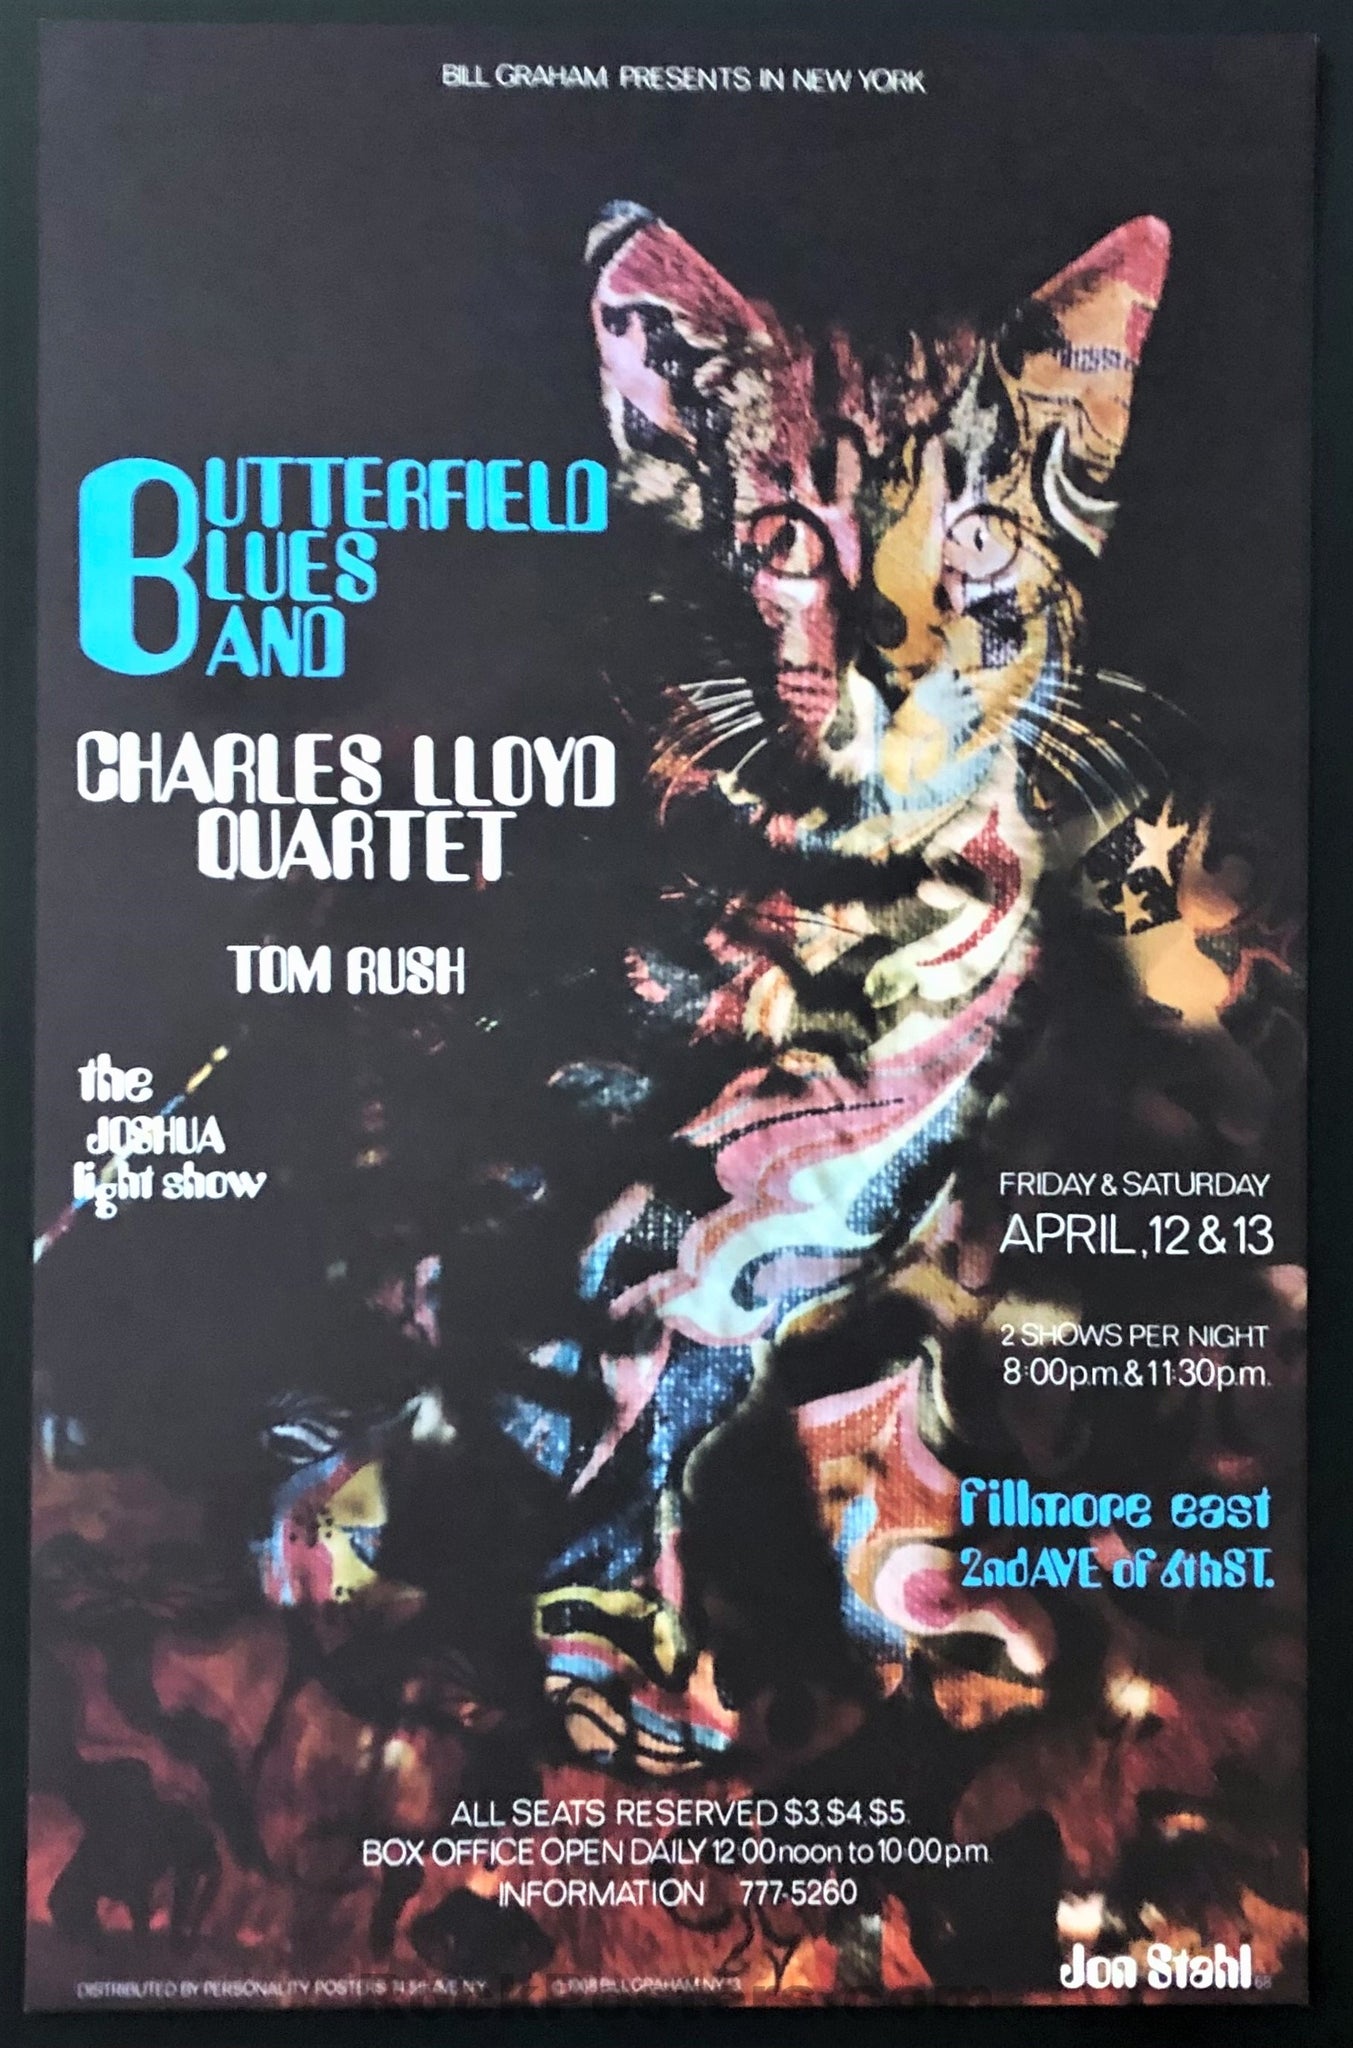 Auction - FE-6 - Butterfield Blues Band - 1968 Poster - Fillmore East - Mint